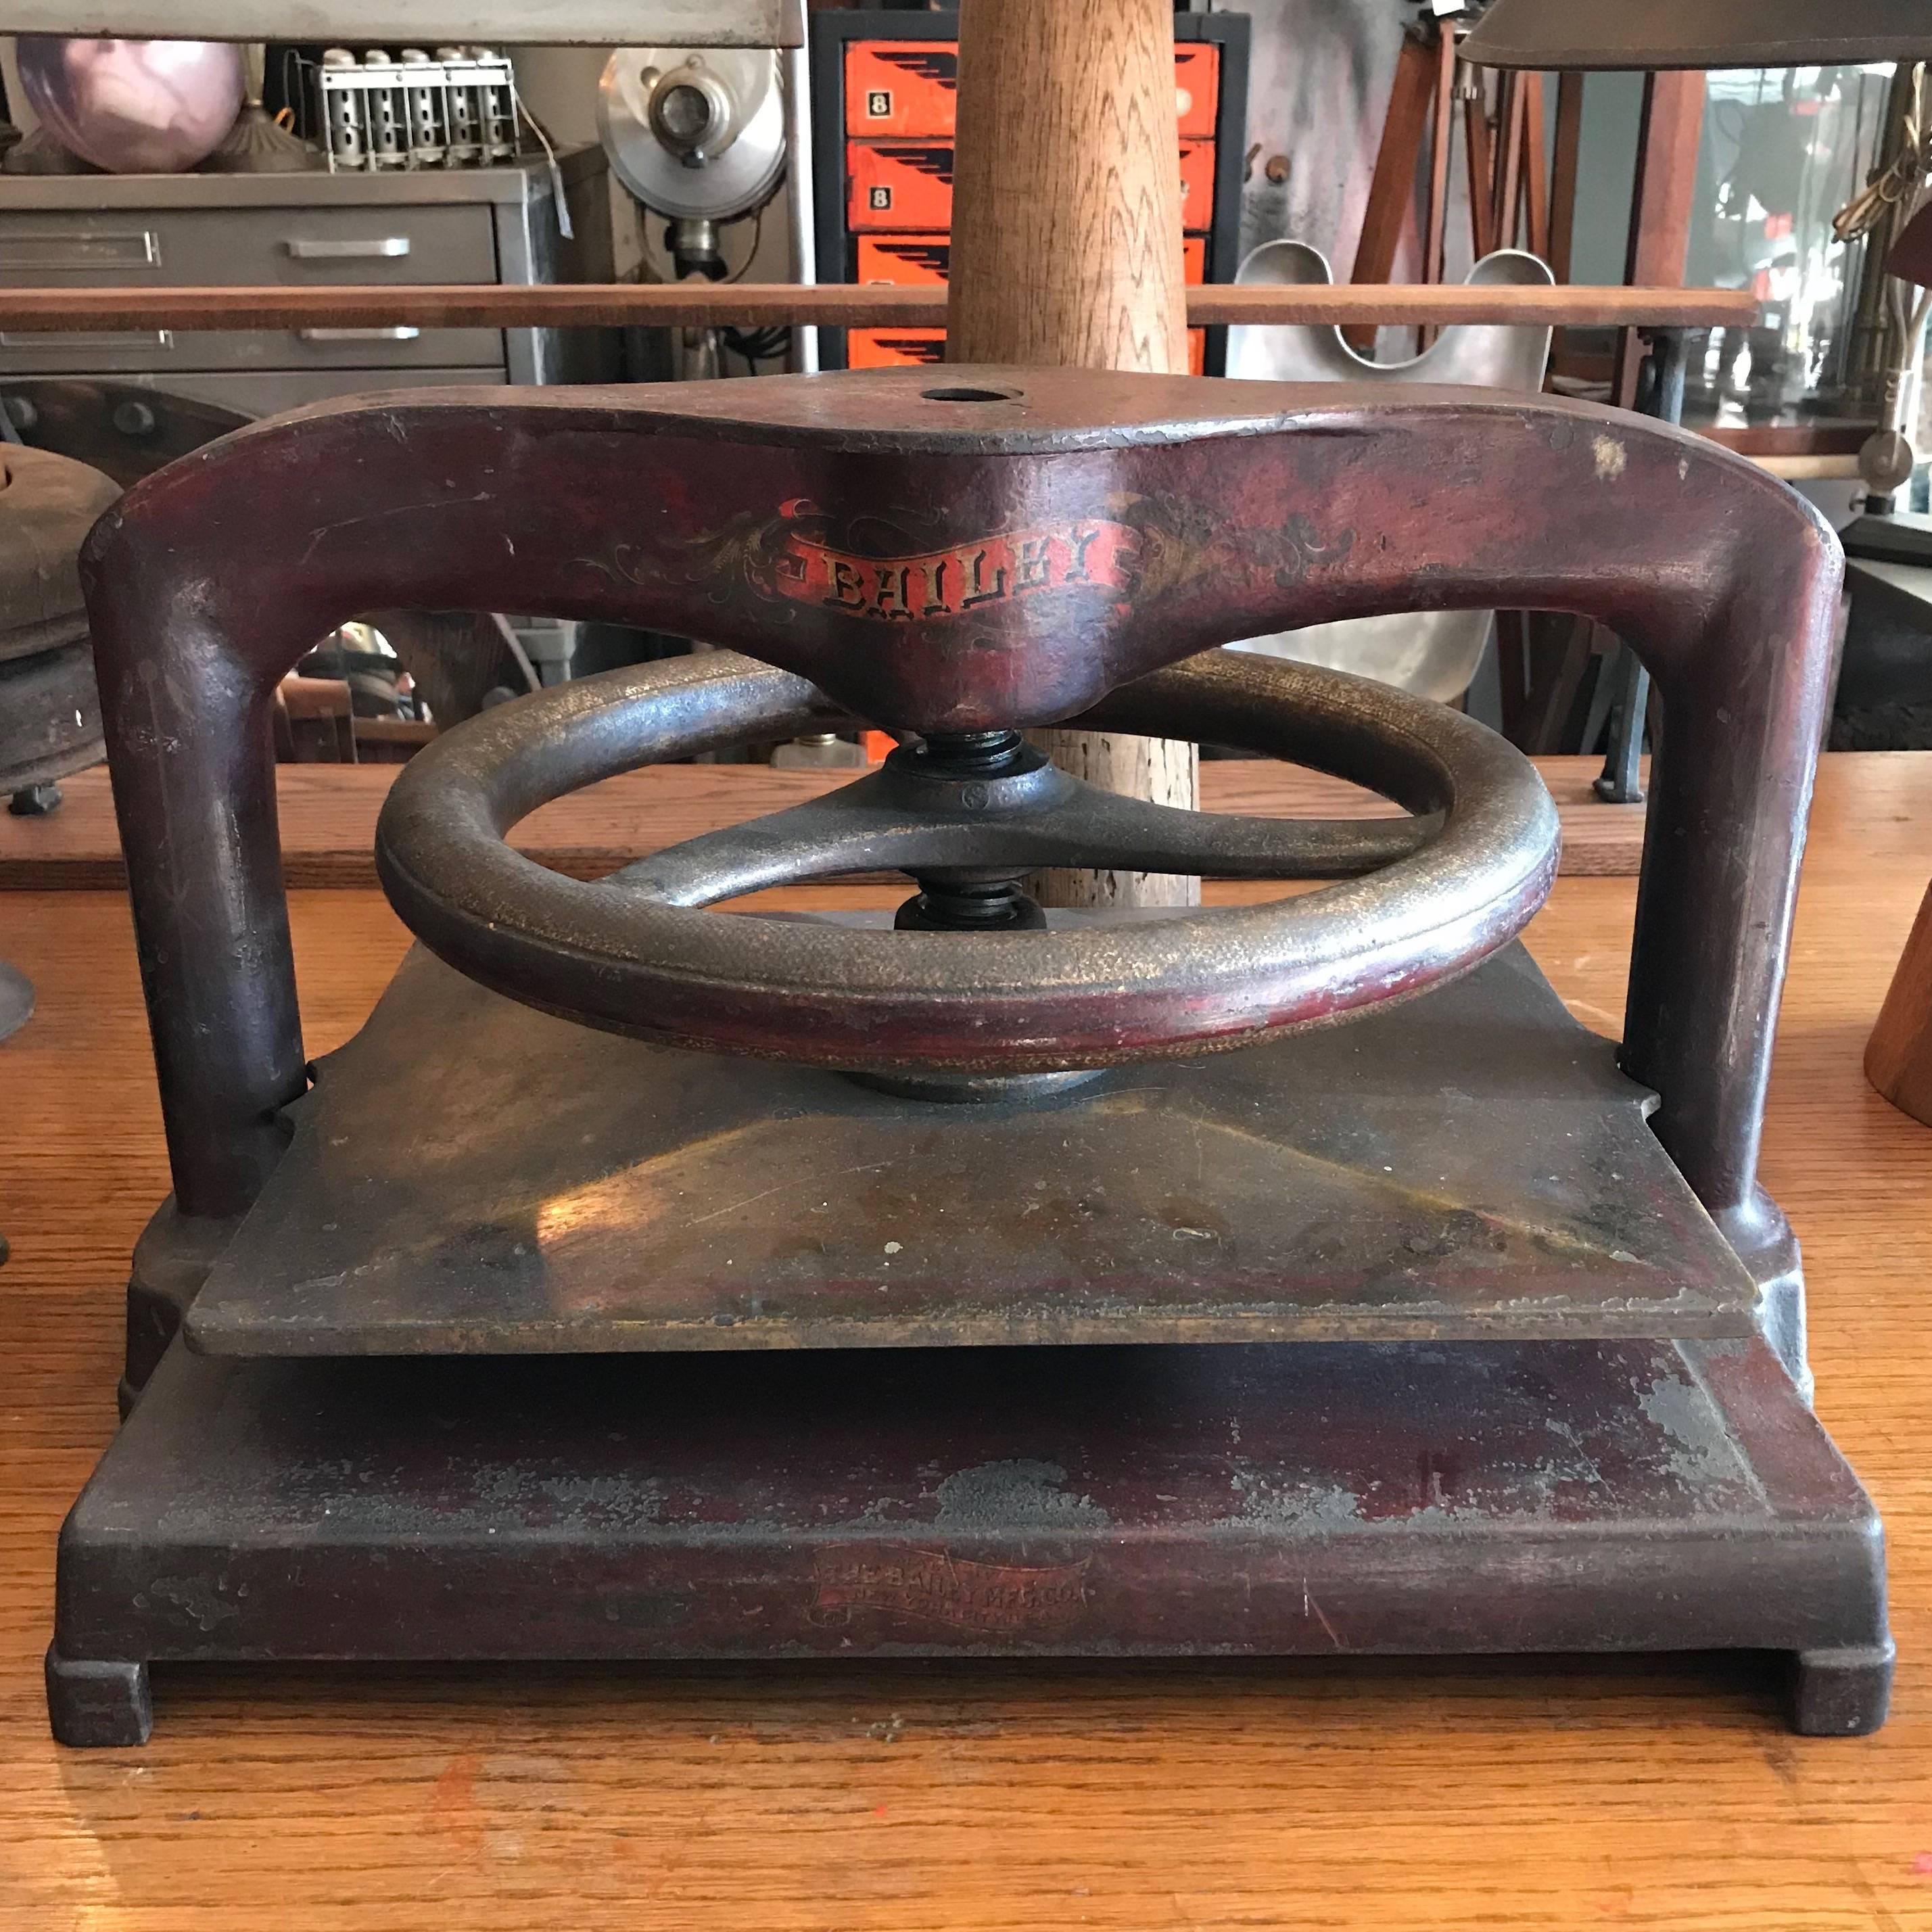 Late 19th century, large, cast iron, letter copying machine or book press manufactured by Bailey Mfg. Co. with large press wheel, features hand-painted details in red and yellow that are aged beautifully. Gap between press plates is approximately